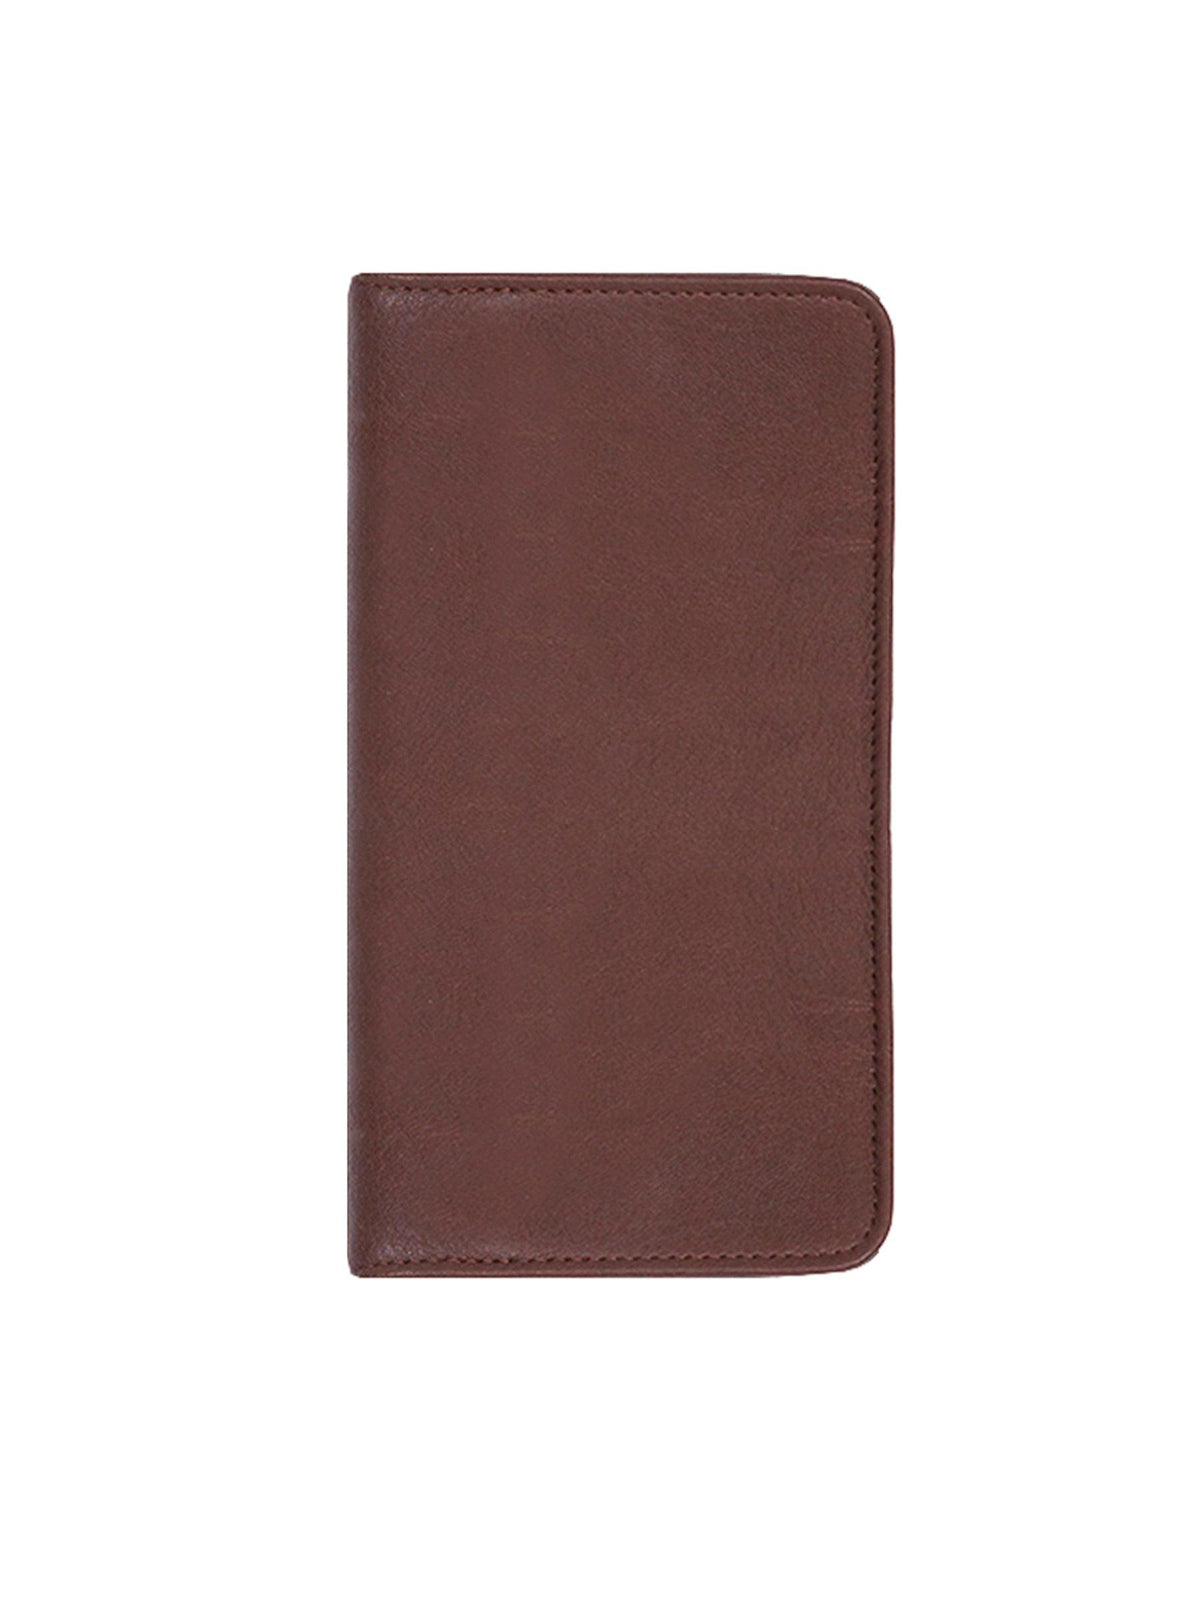 Scully CHOCOLATE BLANK POCKET NOTEBOOK - Flyclothing LLC